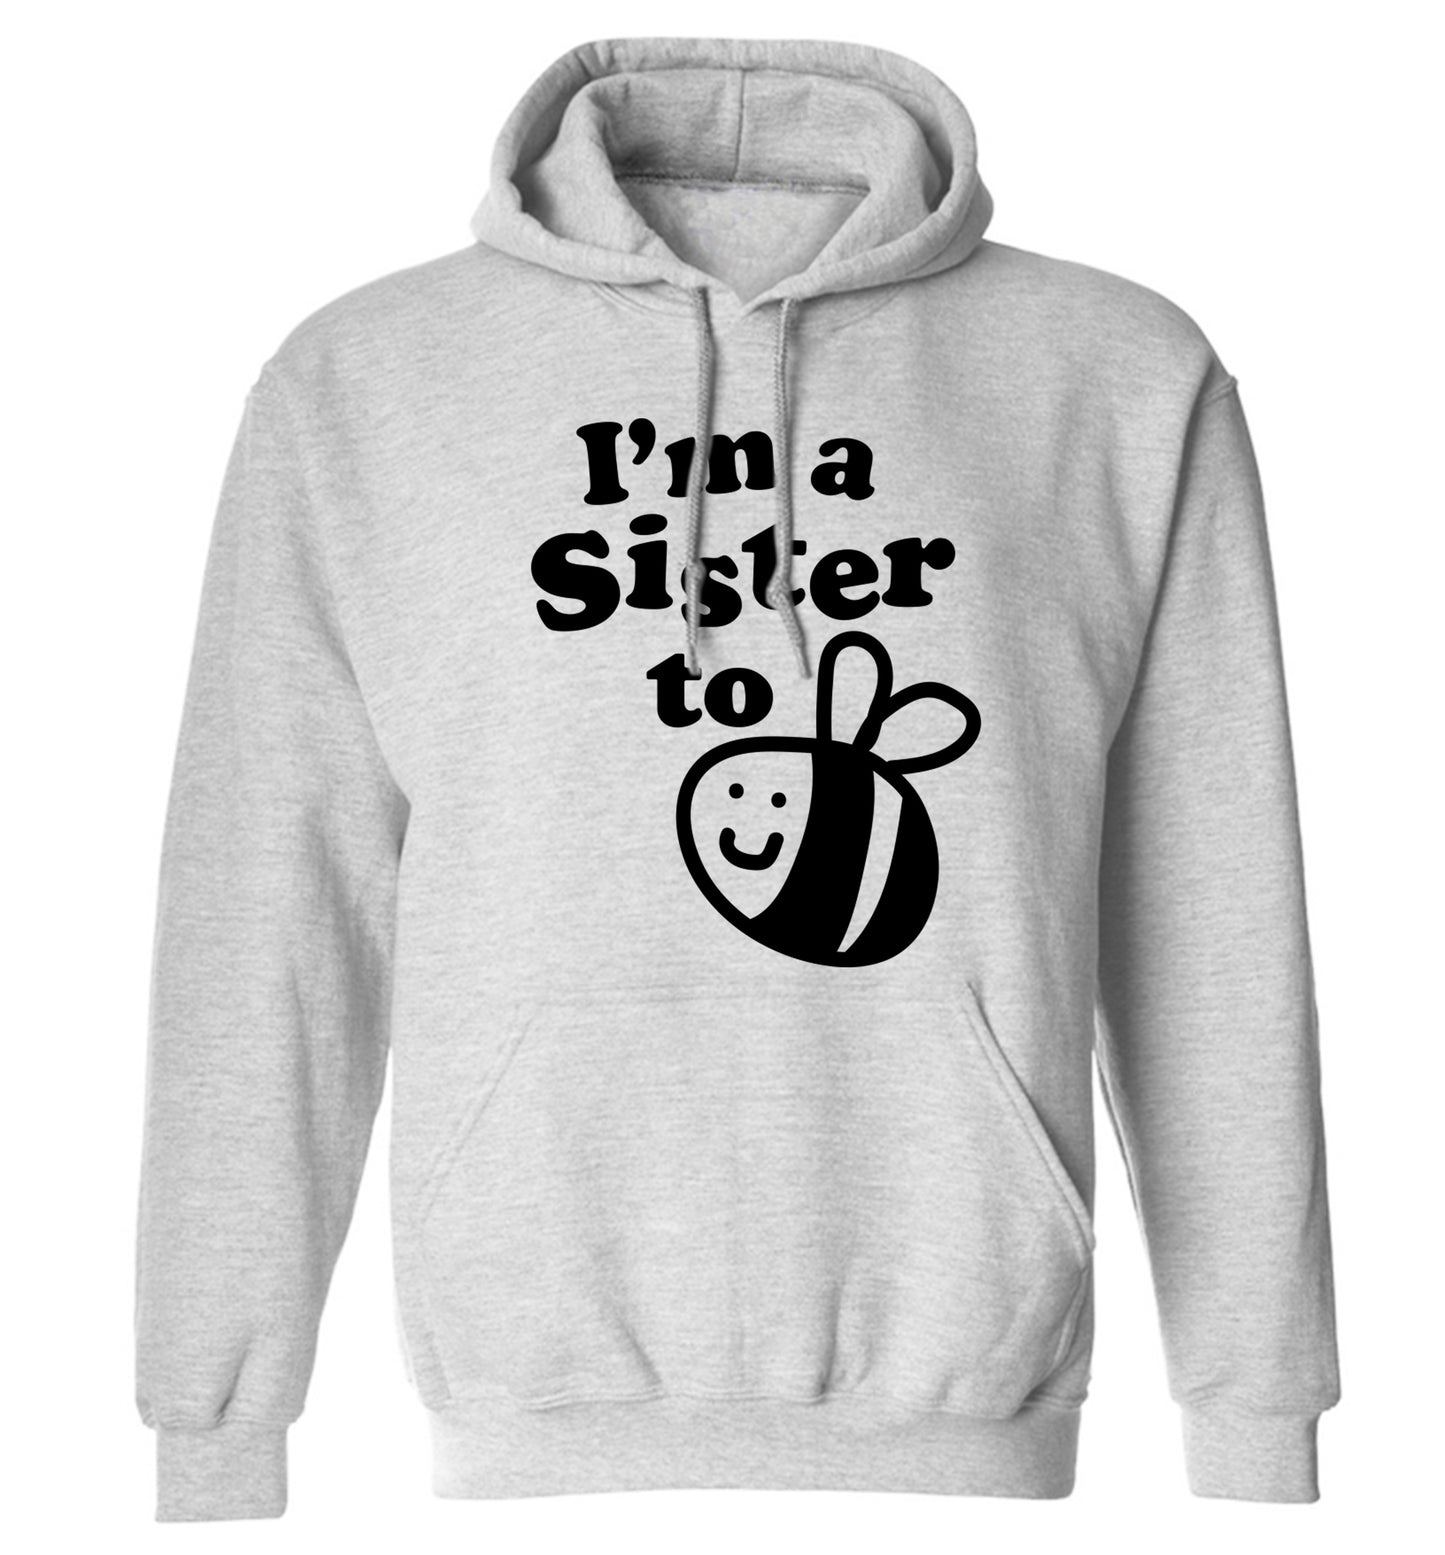 I'm a sister to be adults unisex grey hoodie 2XL